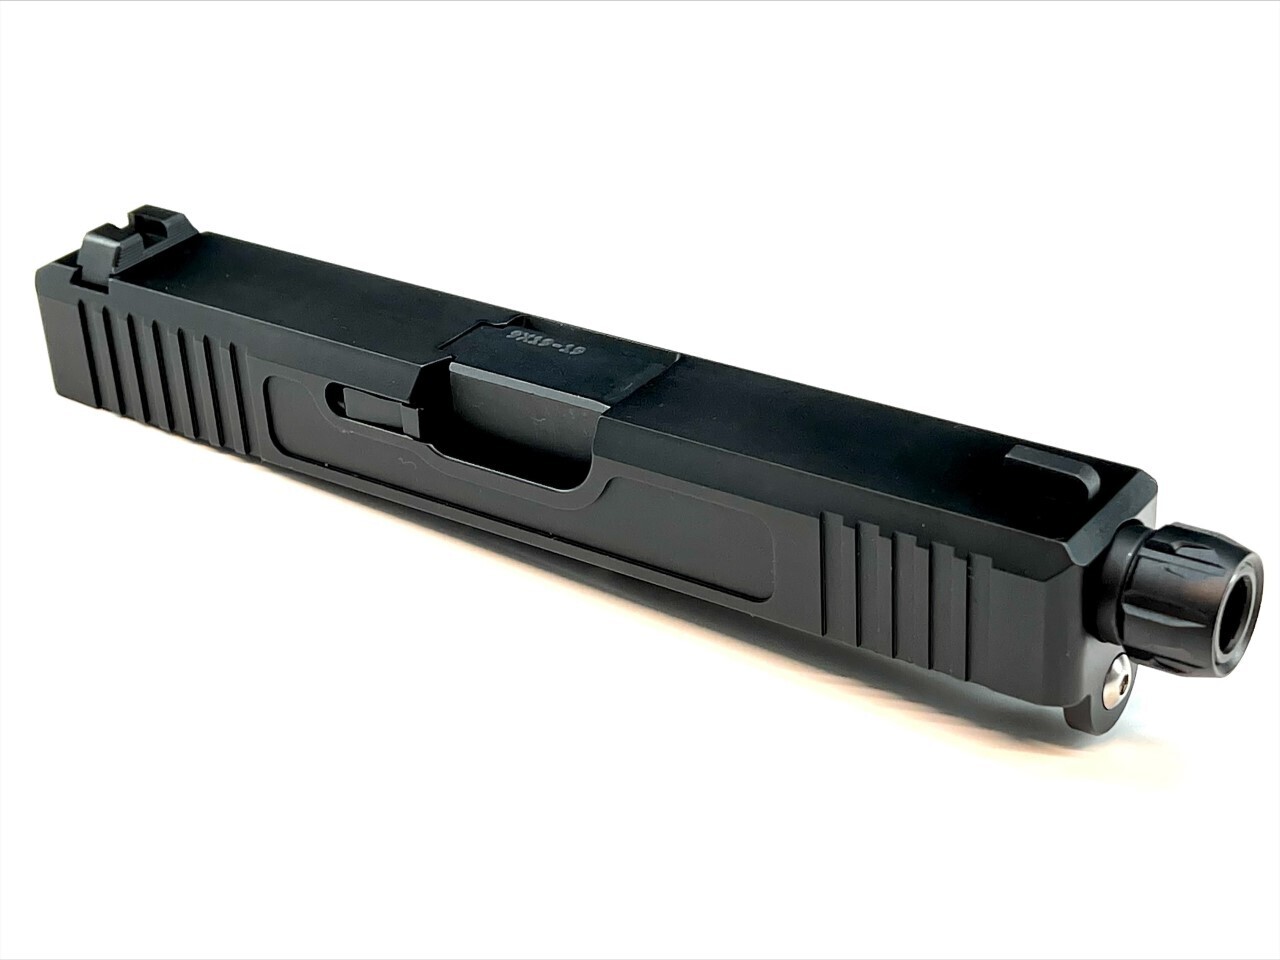 Glock 17 Slide With Front & Rear Serrations - Black Nitride Thread Barrel With Protector - Black Nitride Slide - Steel Sights - Stainless Steel Guide Rod - Comes Completely Assembled